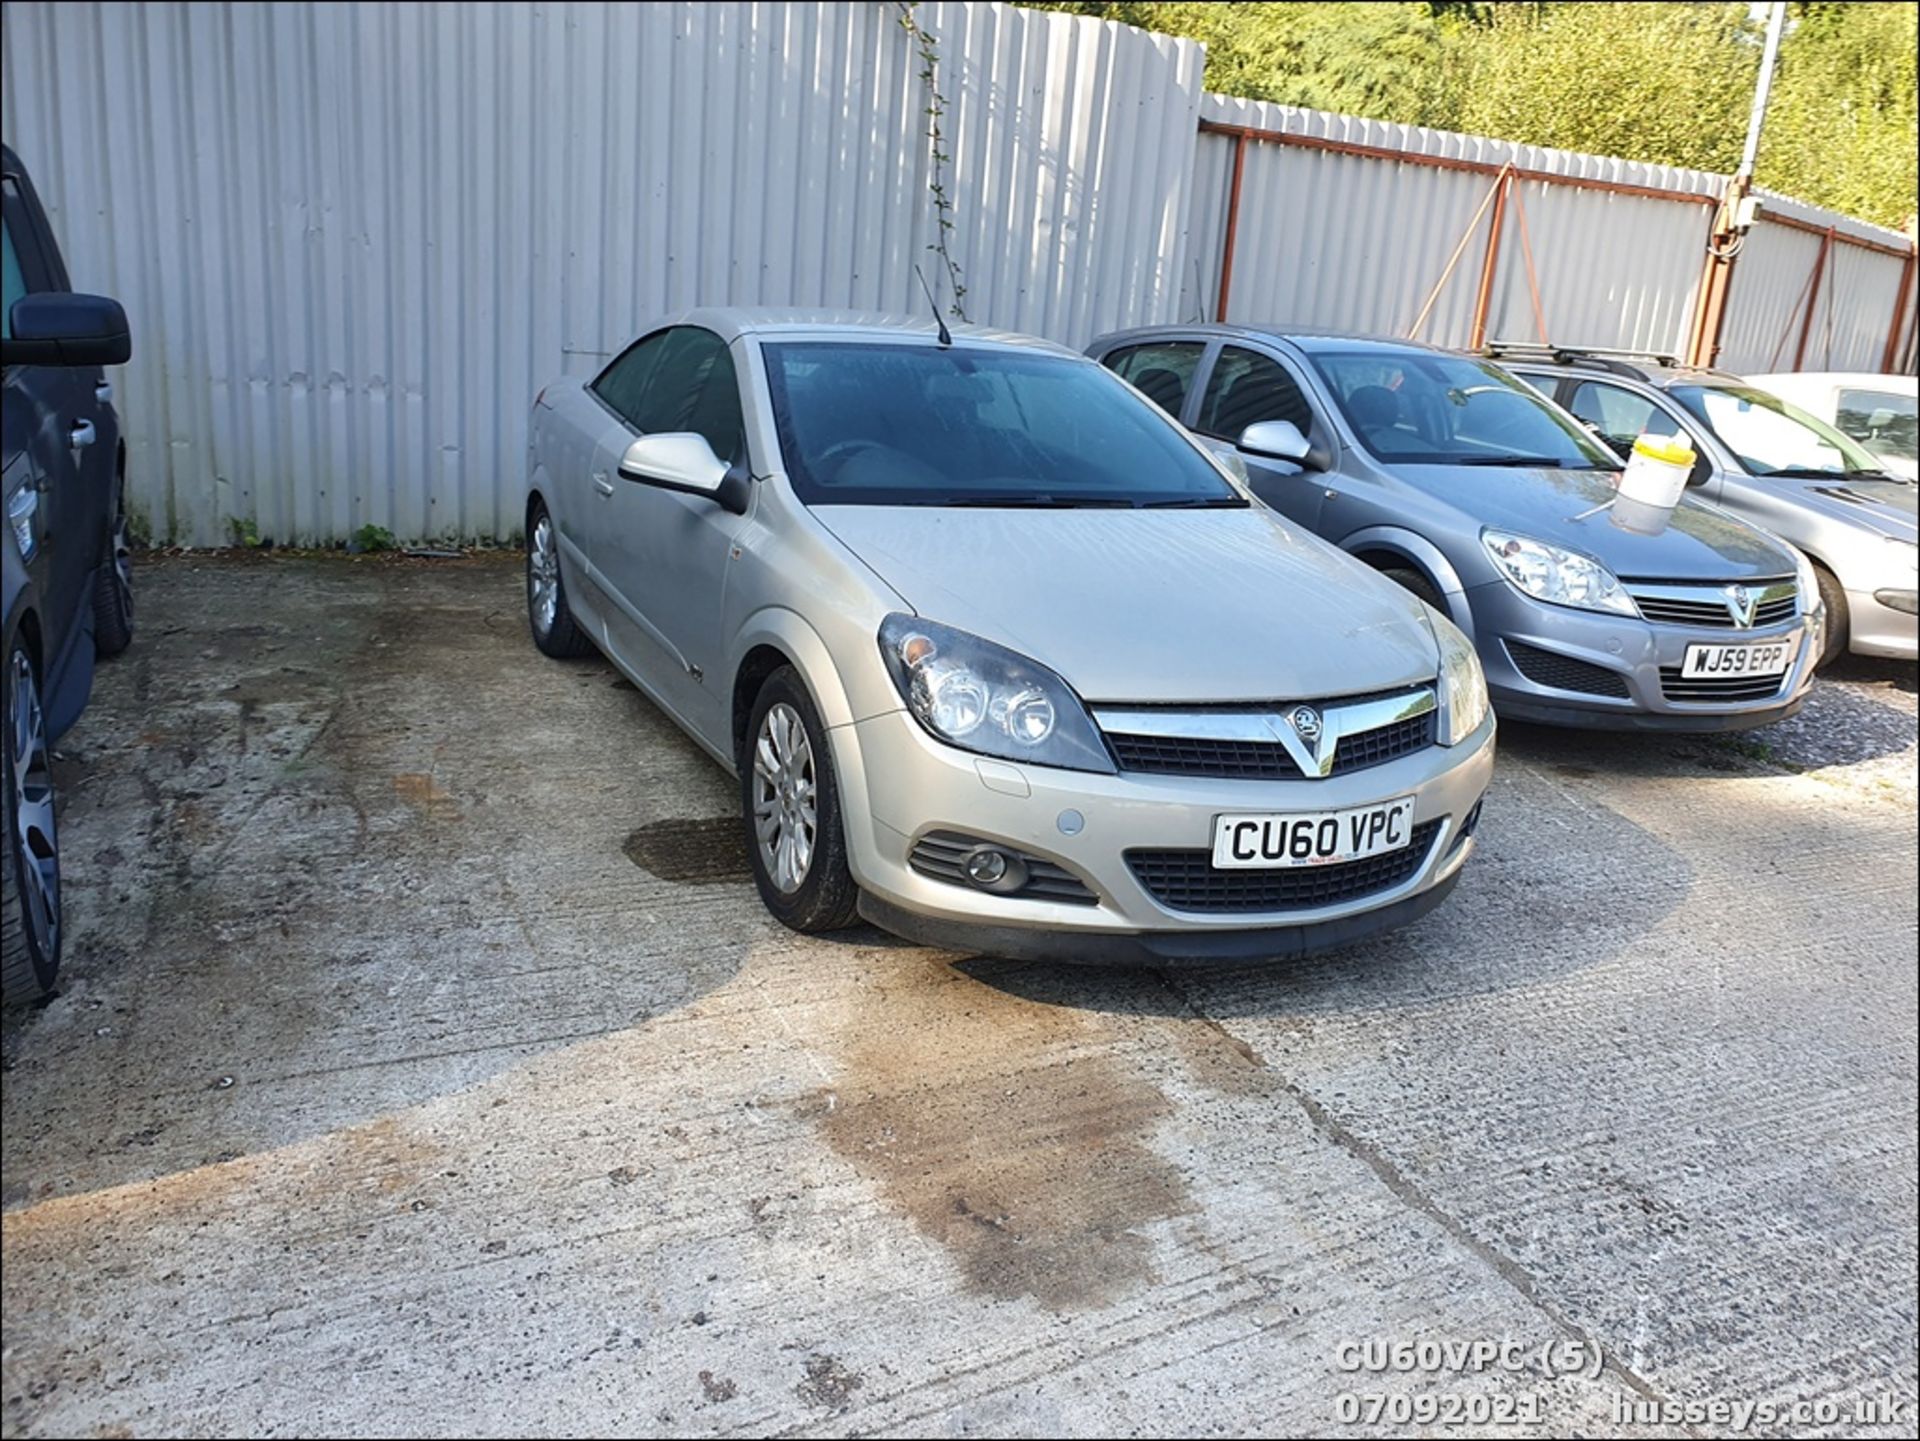 11/60 VAUXHALL ASTRA SPORT - 1796cc 2dr Convertible (Silver, 123k) - Image 5 of 12